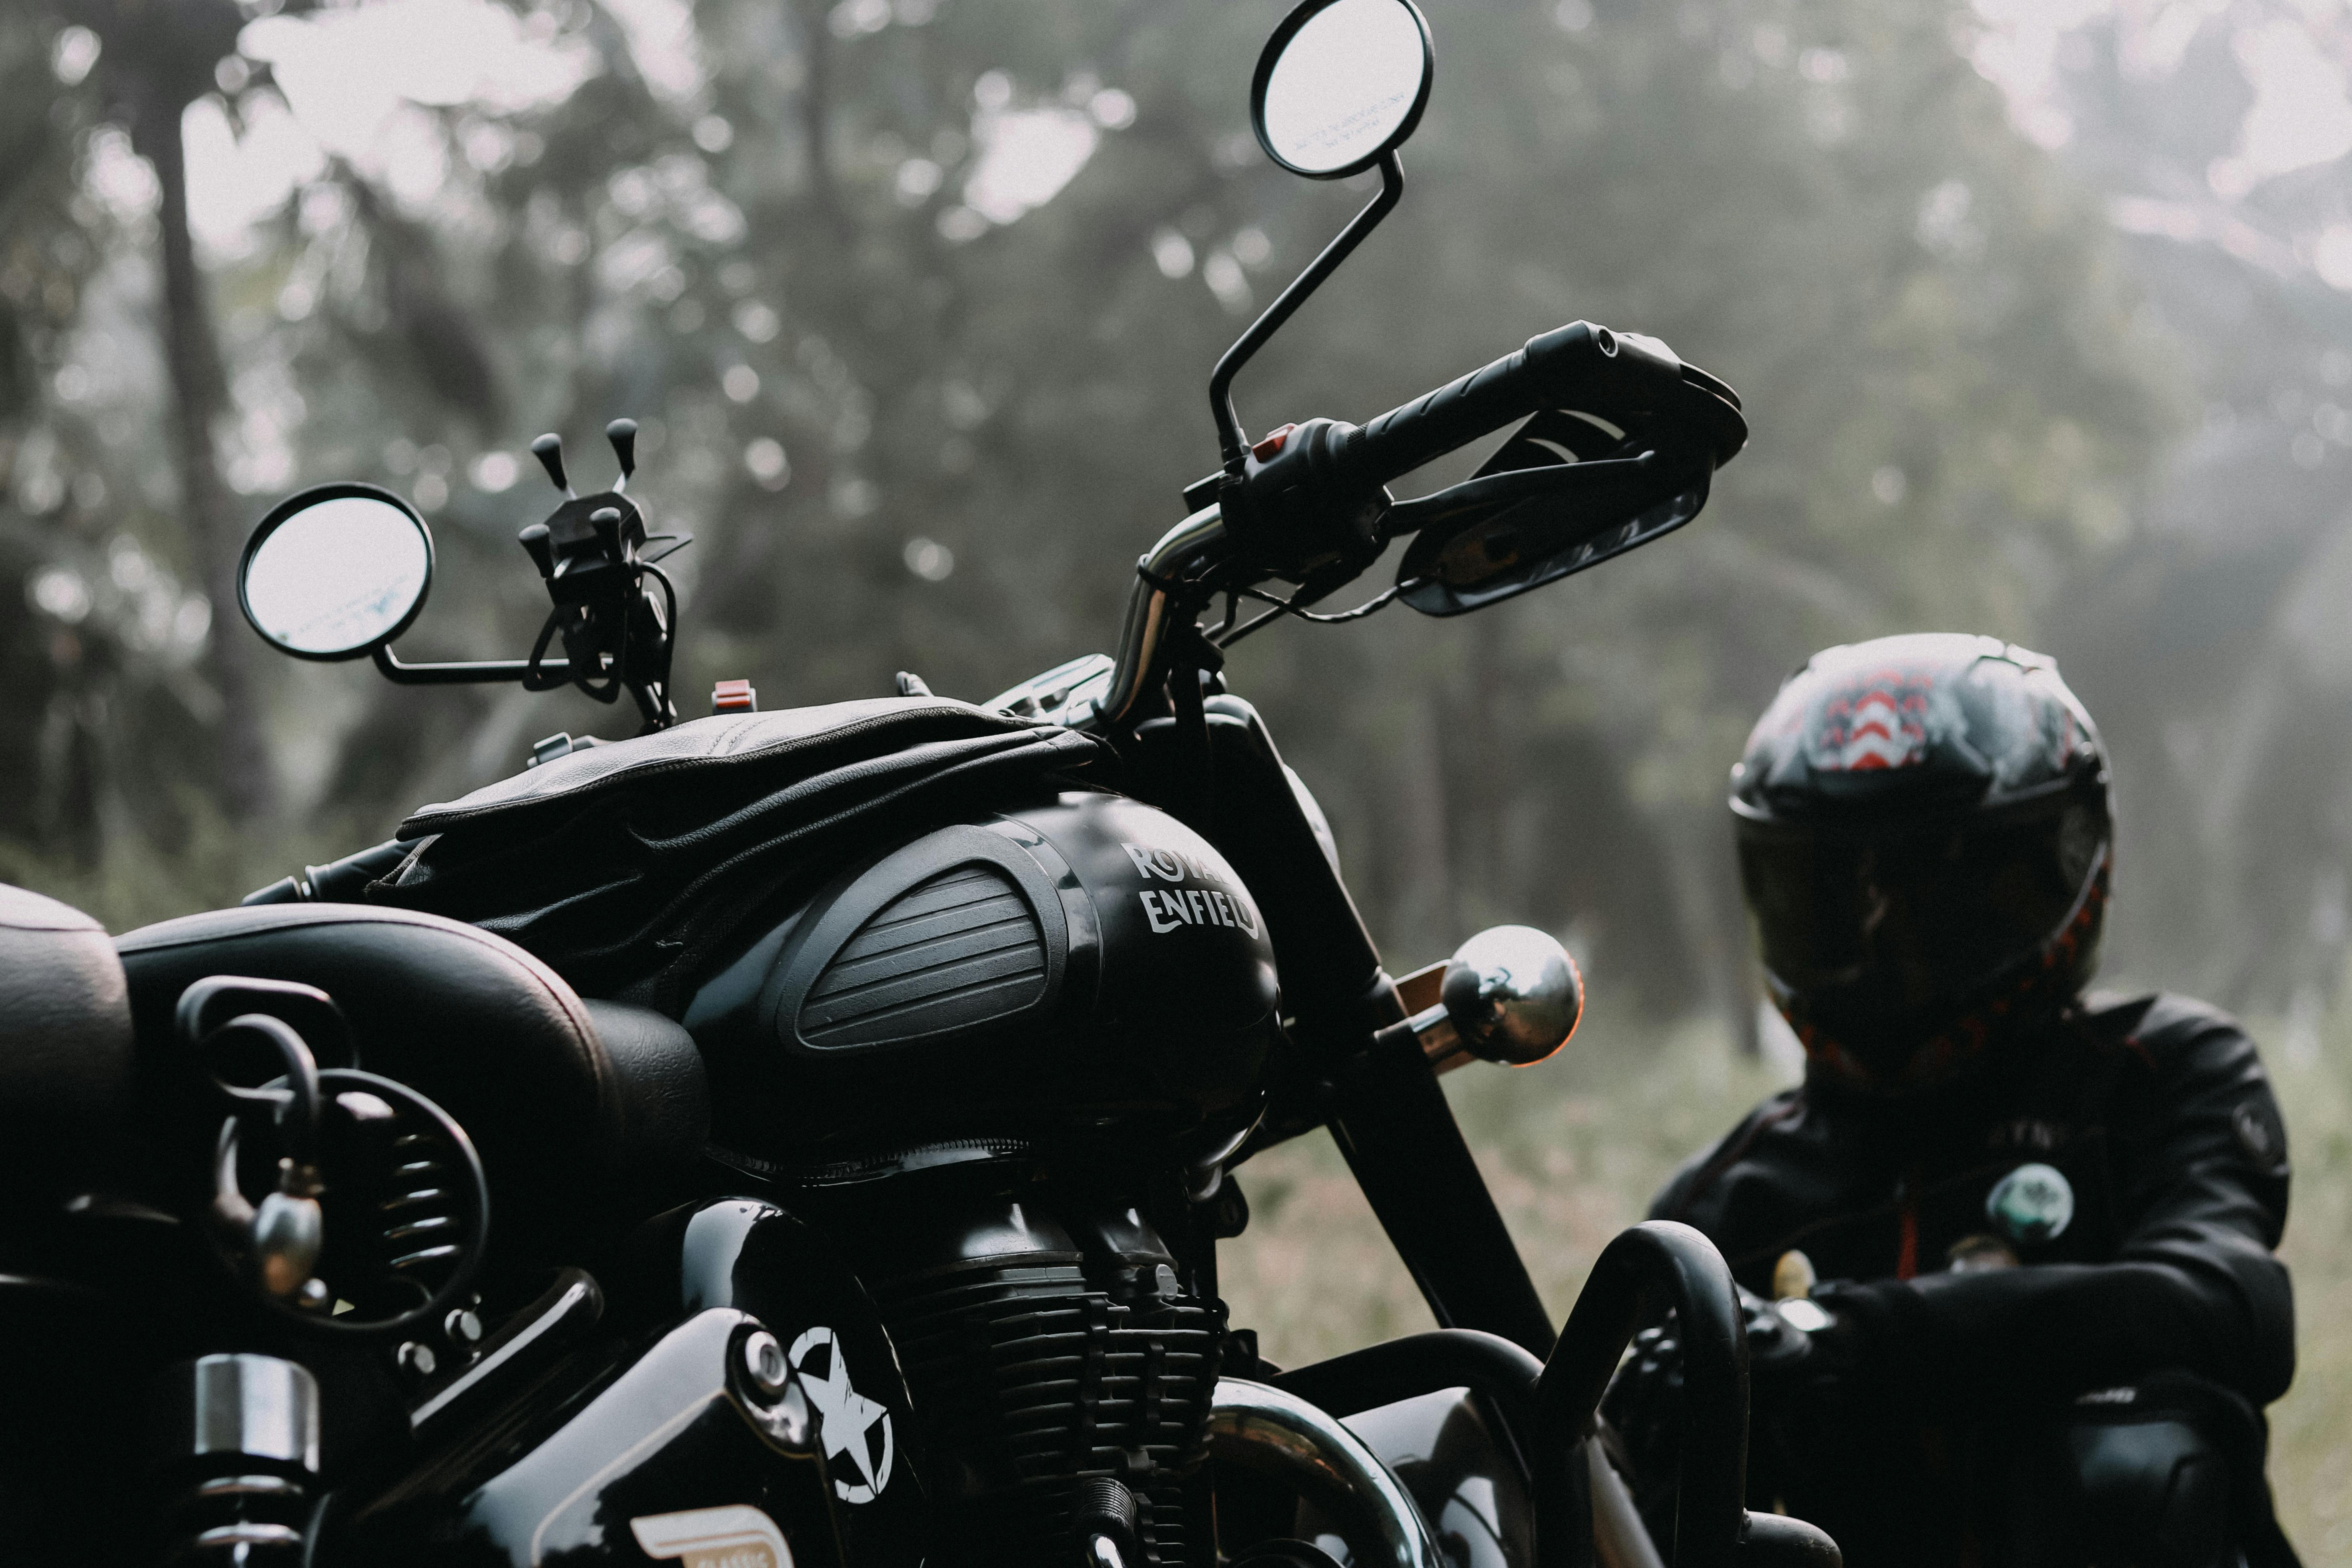 Royal Enfield Photos, Download The BEST Free Royal Enfield Stock Photos &  HD Images